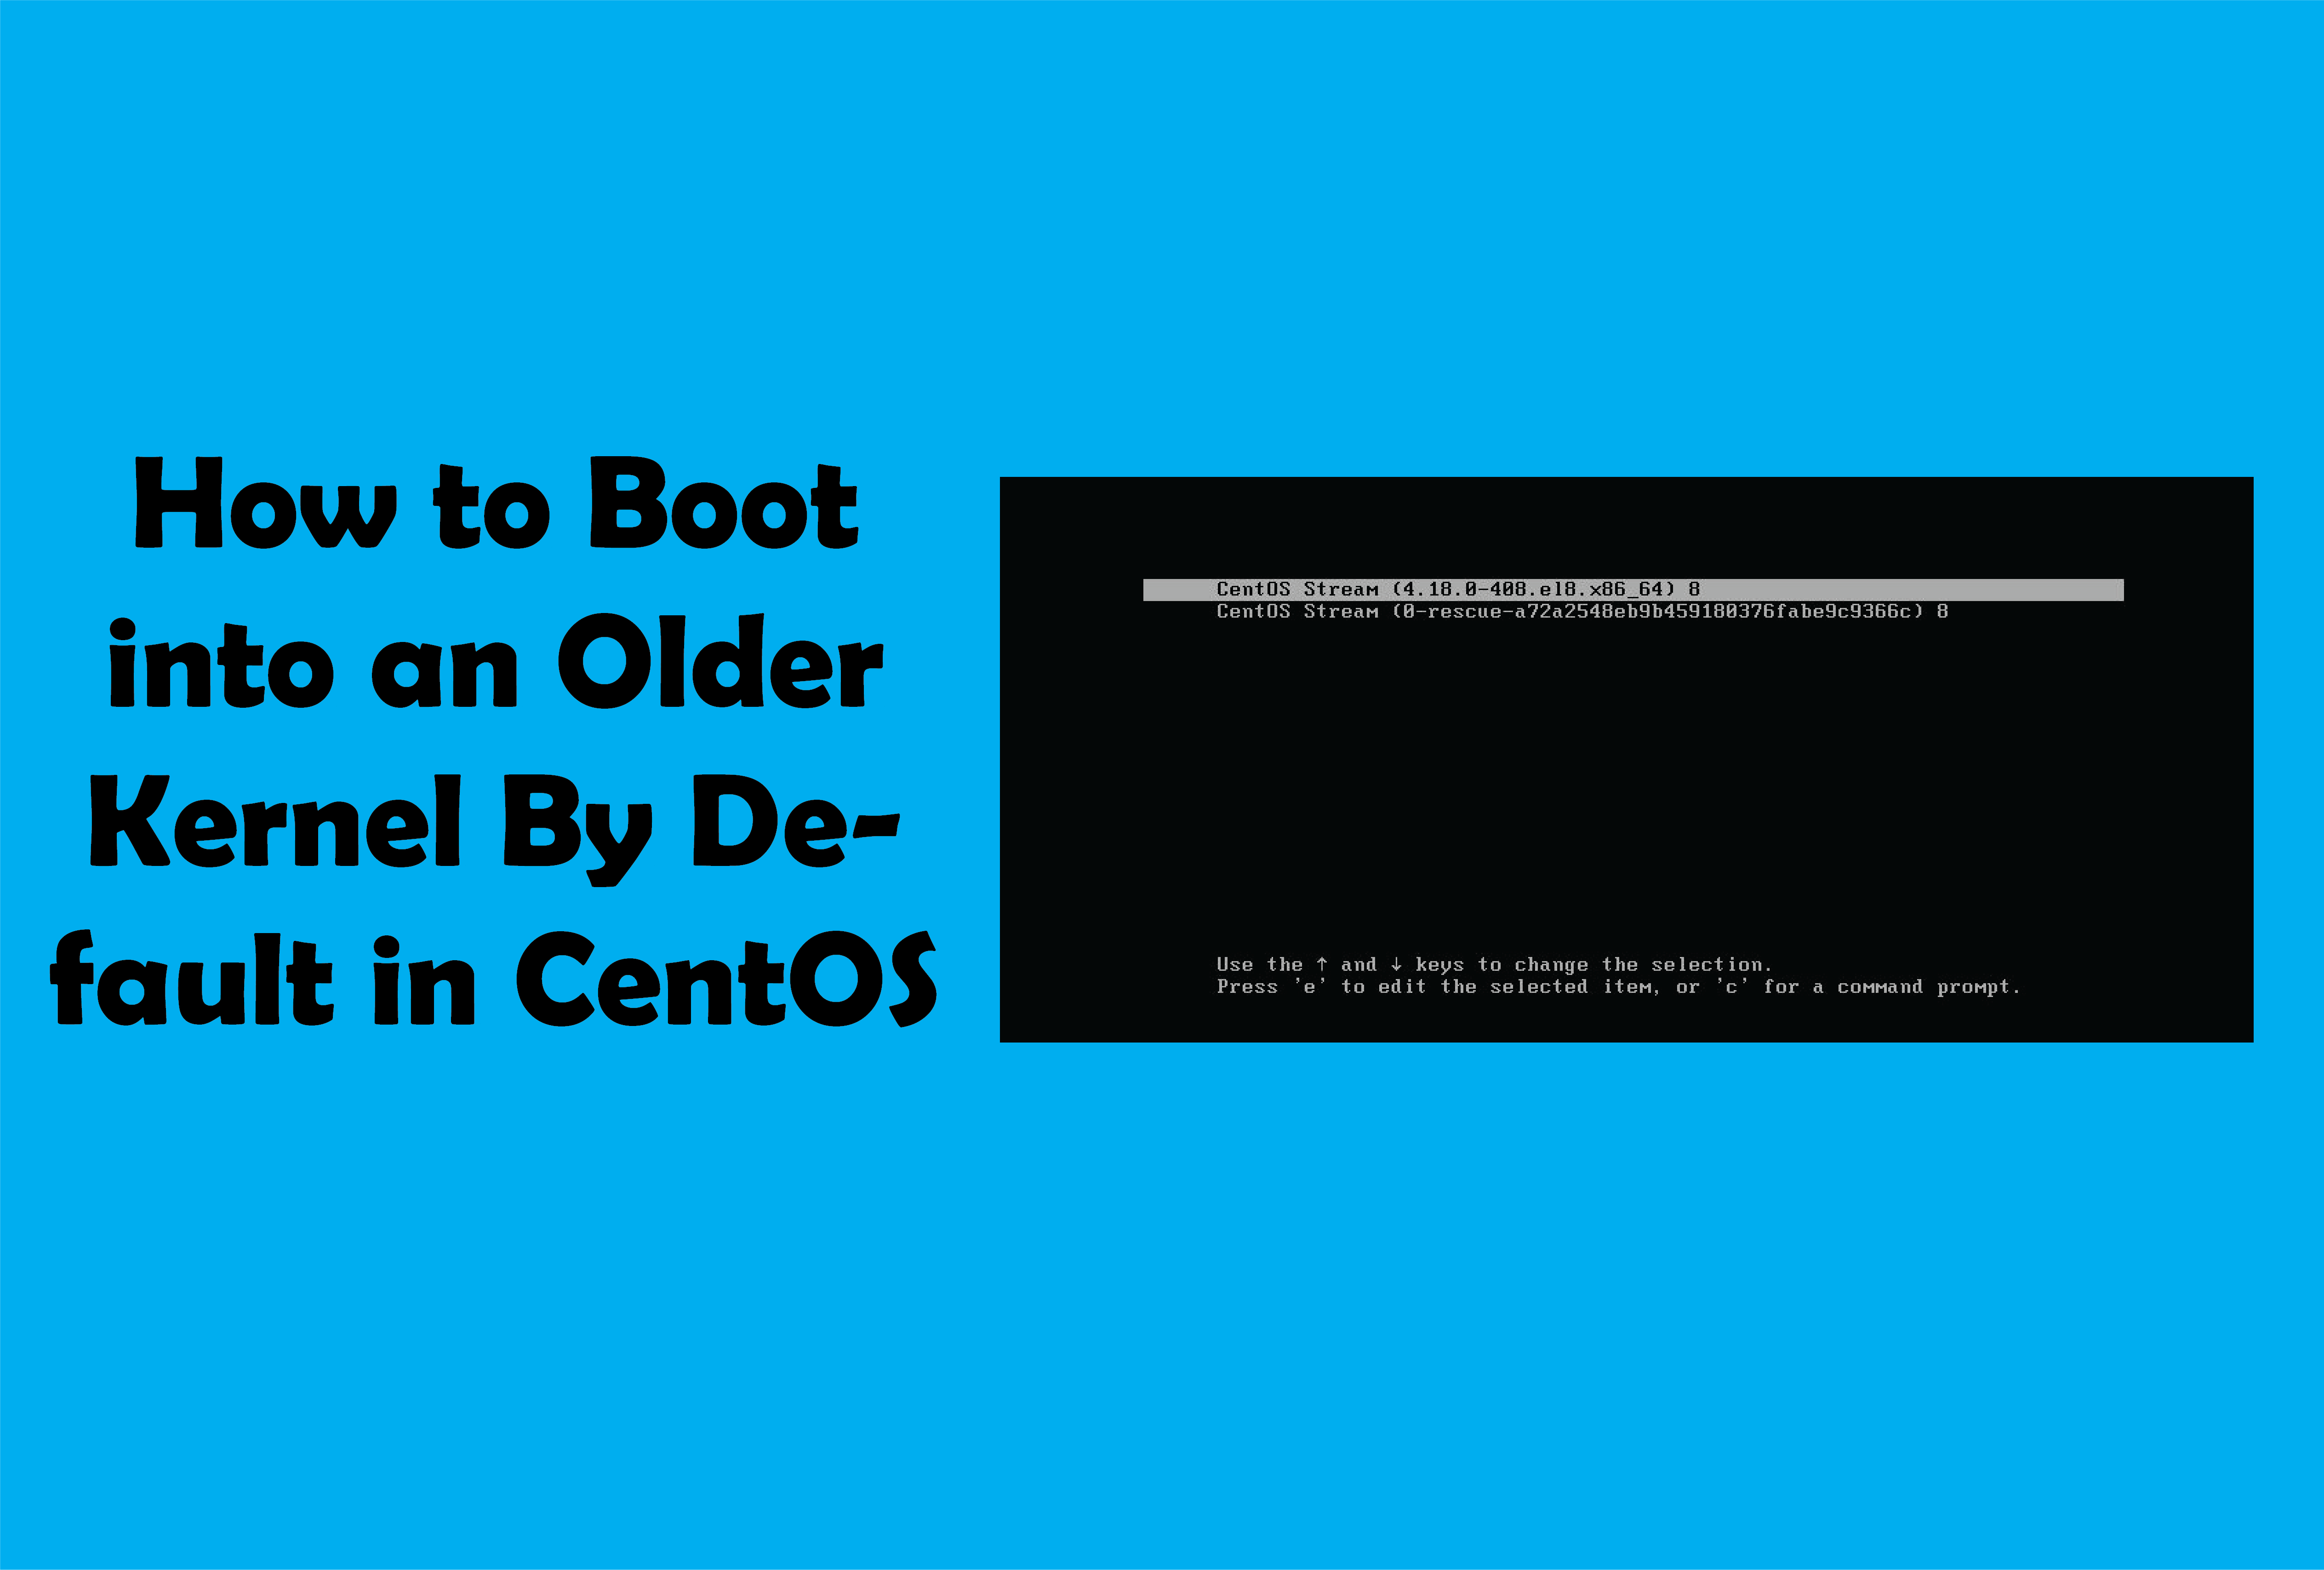 Boot into an Older Kernel